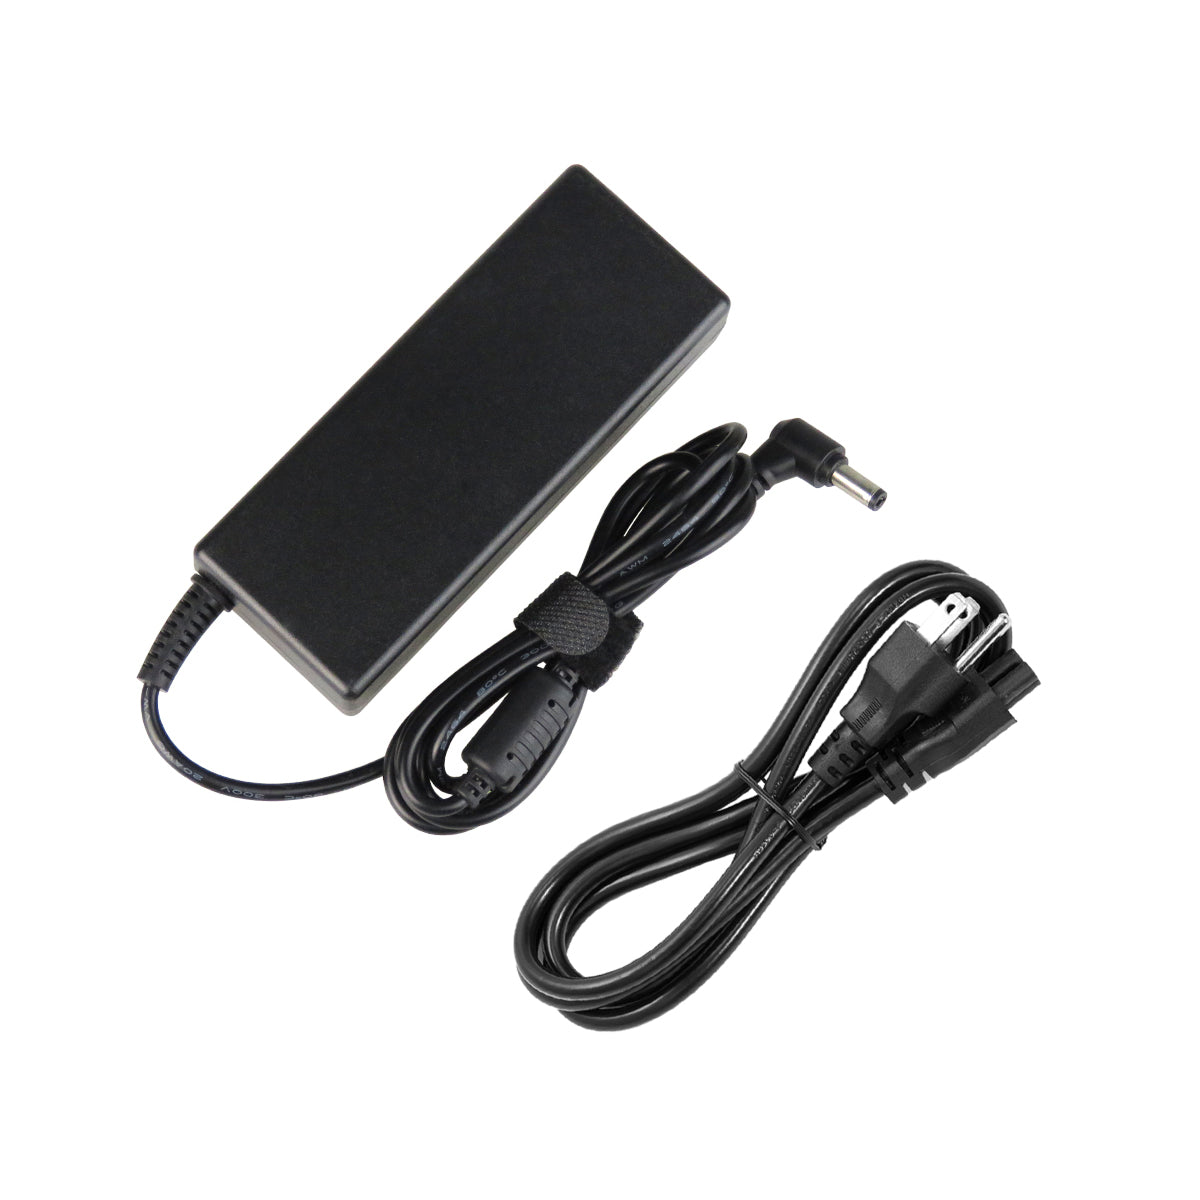 AC Adapter Charger for ASUS U57N Notebook.